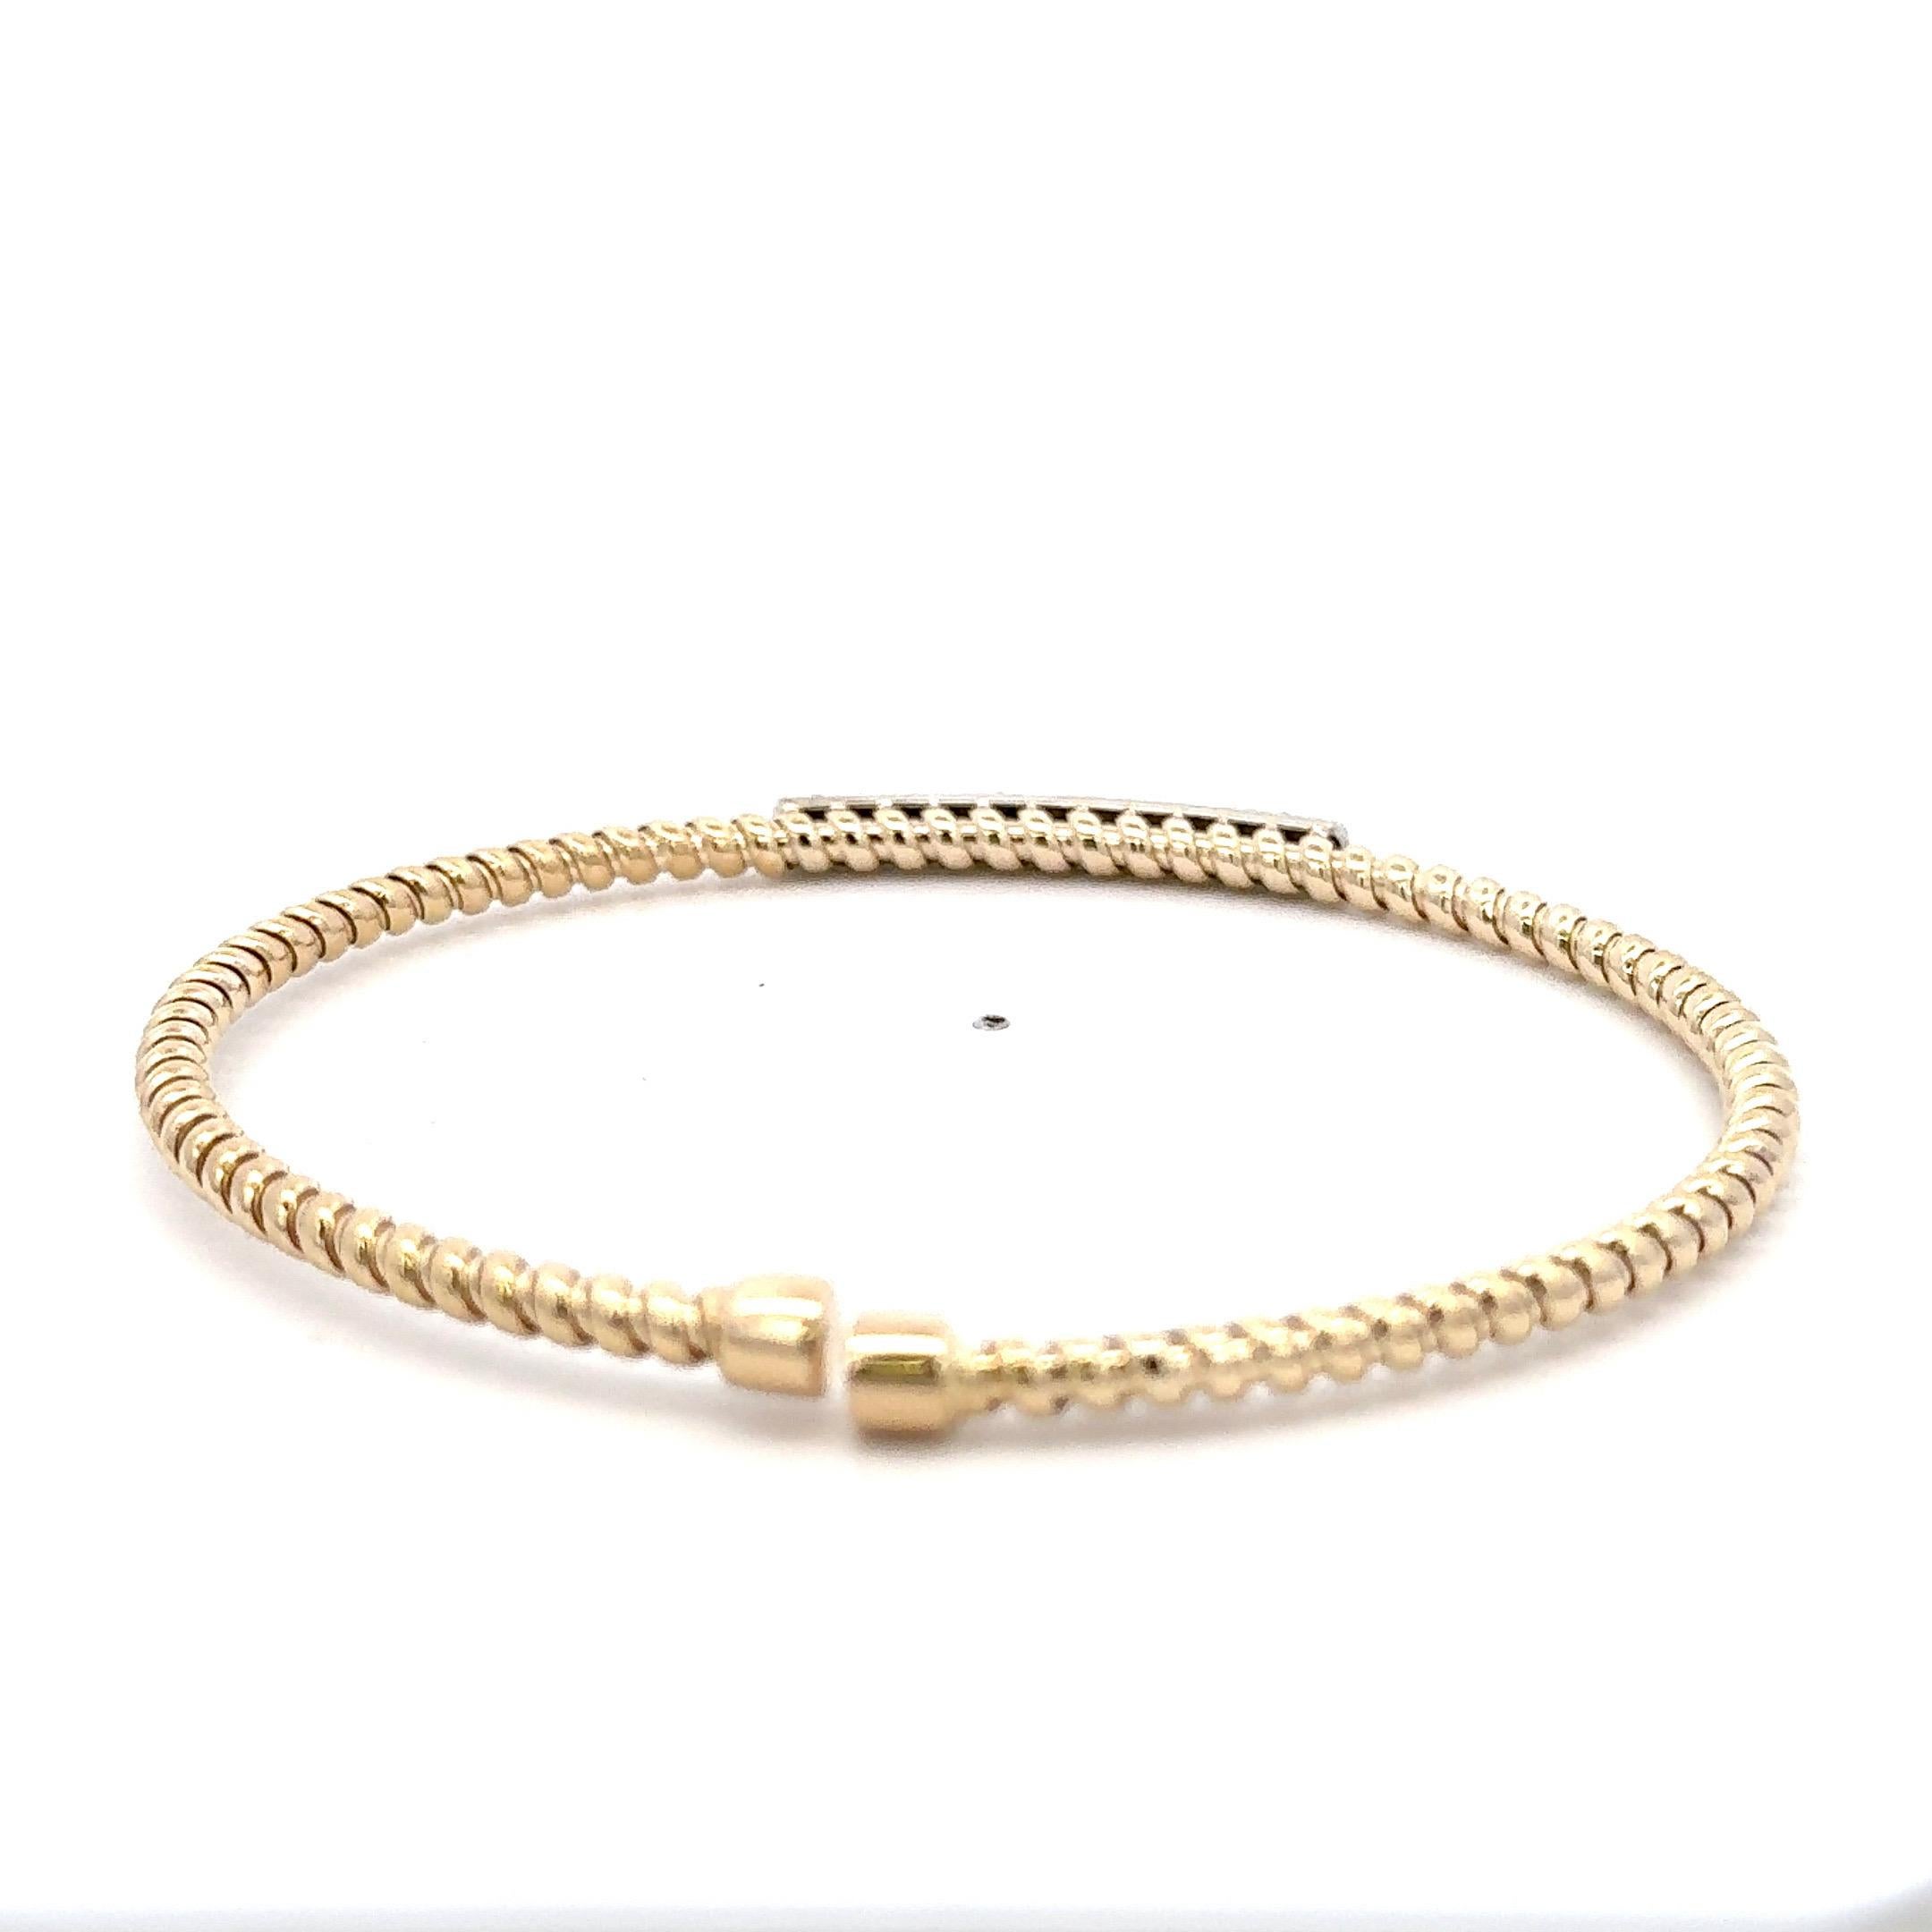 Italian 14 karat yellow gold twist bangle bracelet with a diamond bar containing 42 round brilliants weighing 0.38 carats.
Color F
Clarity VS1-VS2